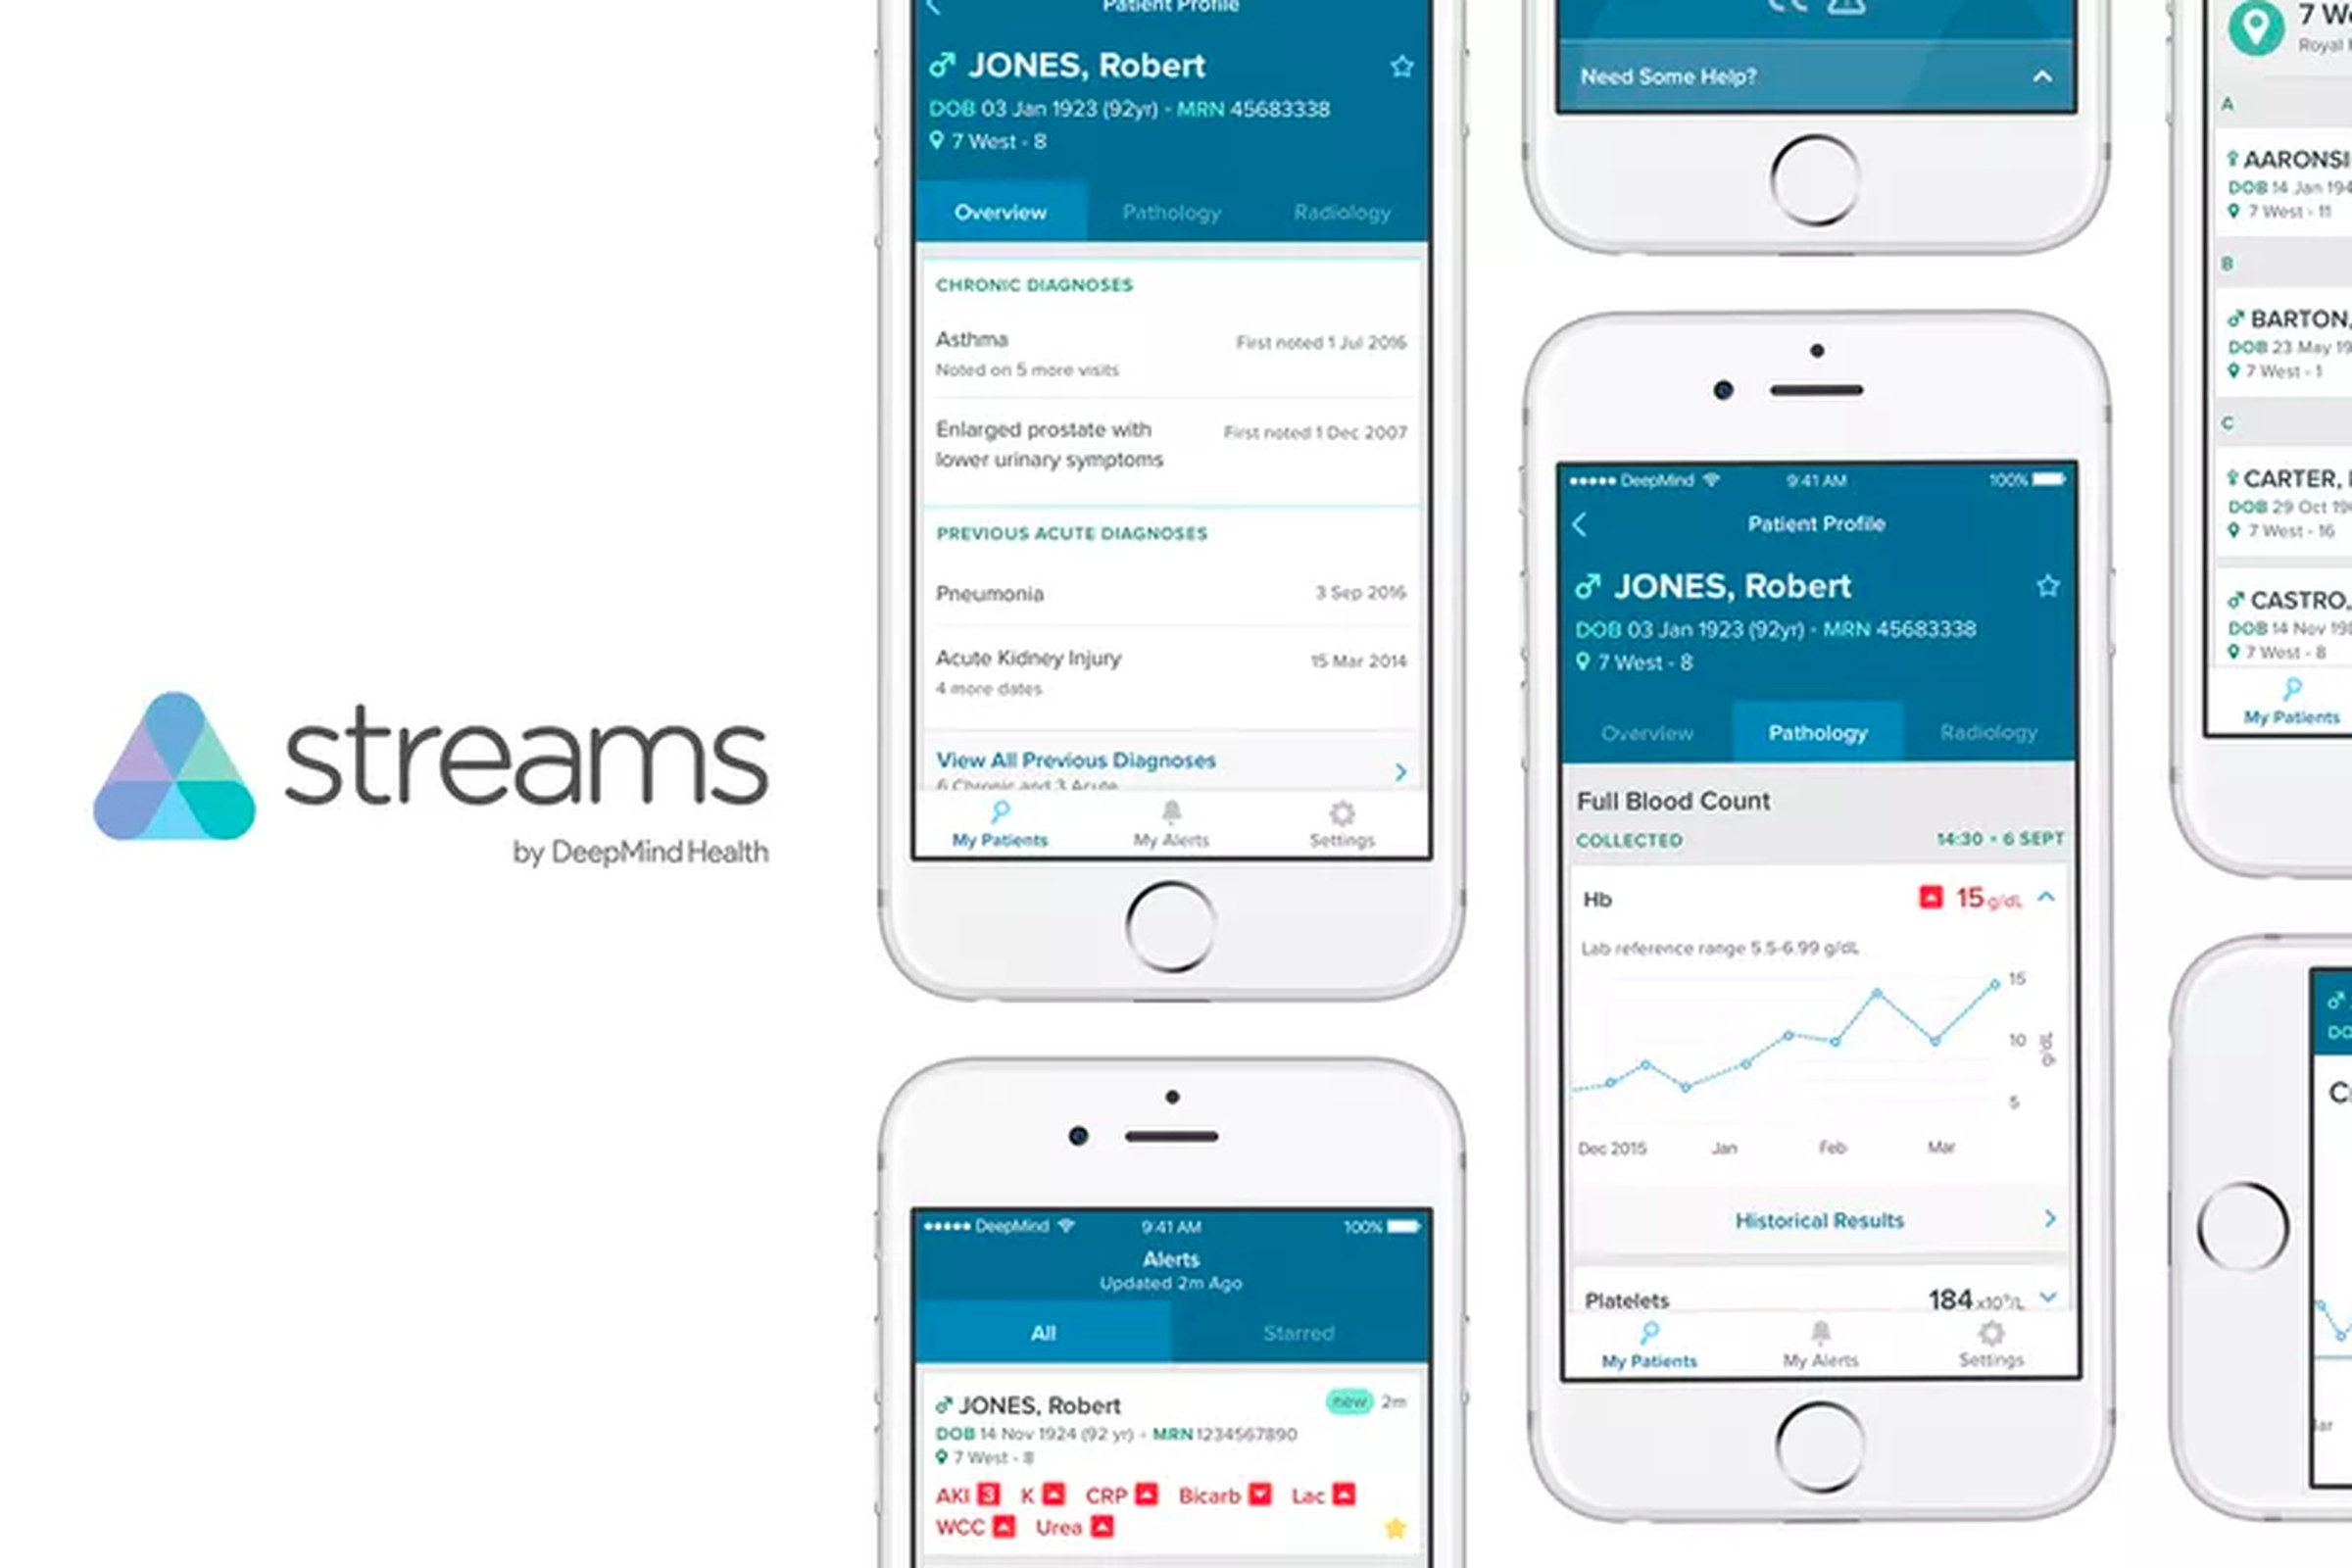 DeepMind Health’s most prominent product is its Streams app, which helps manage patients in hospitals. 